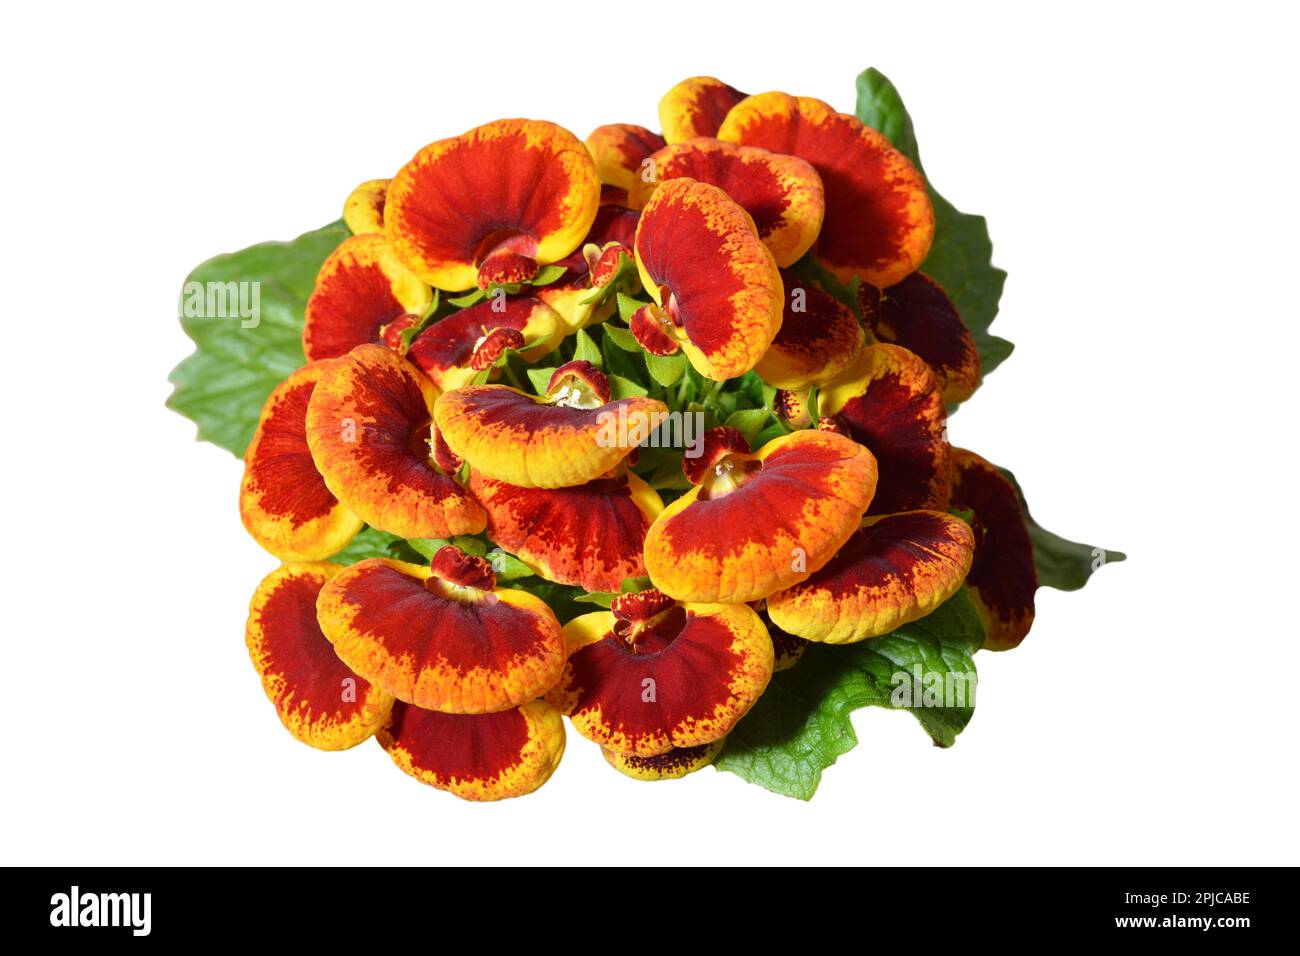 Top view of Calceolaria plant isolated on white background Stock Photo